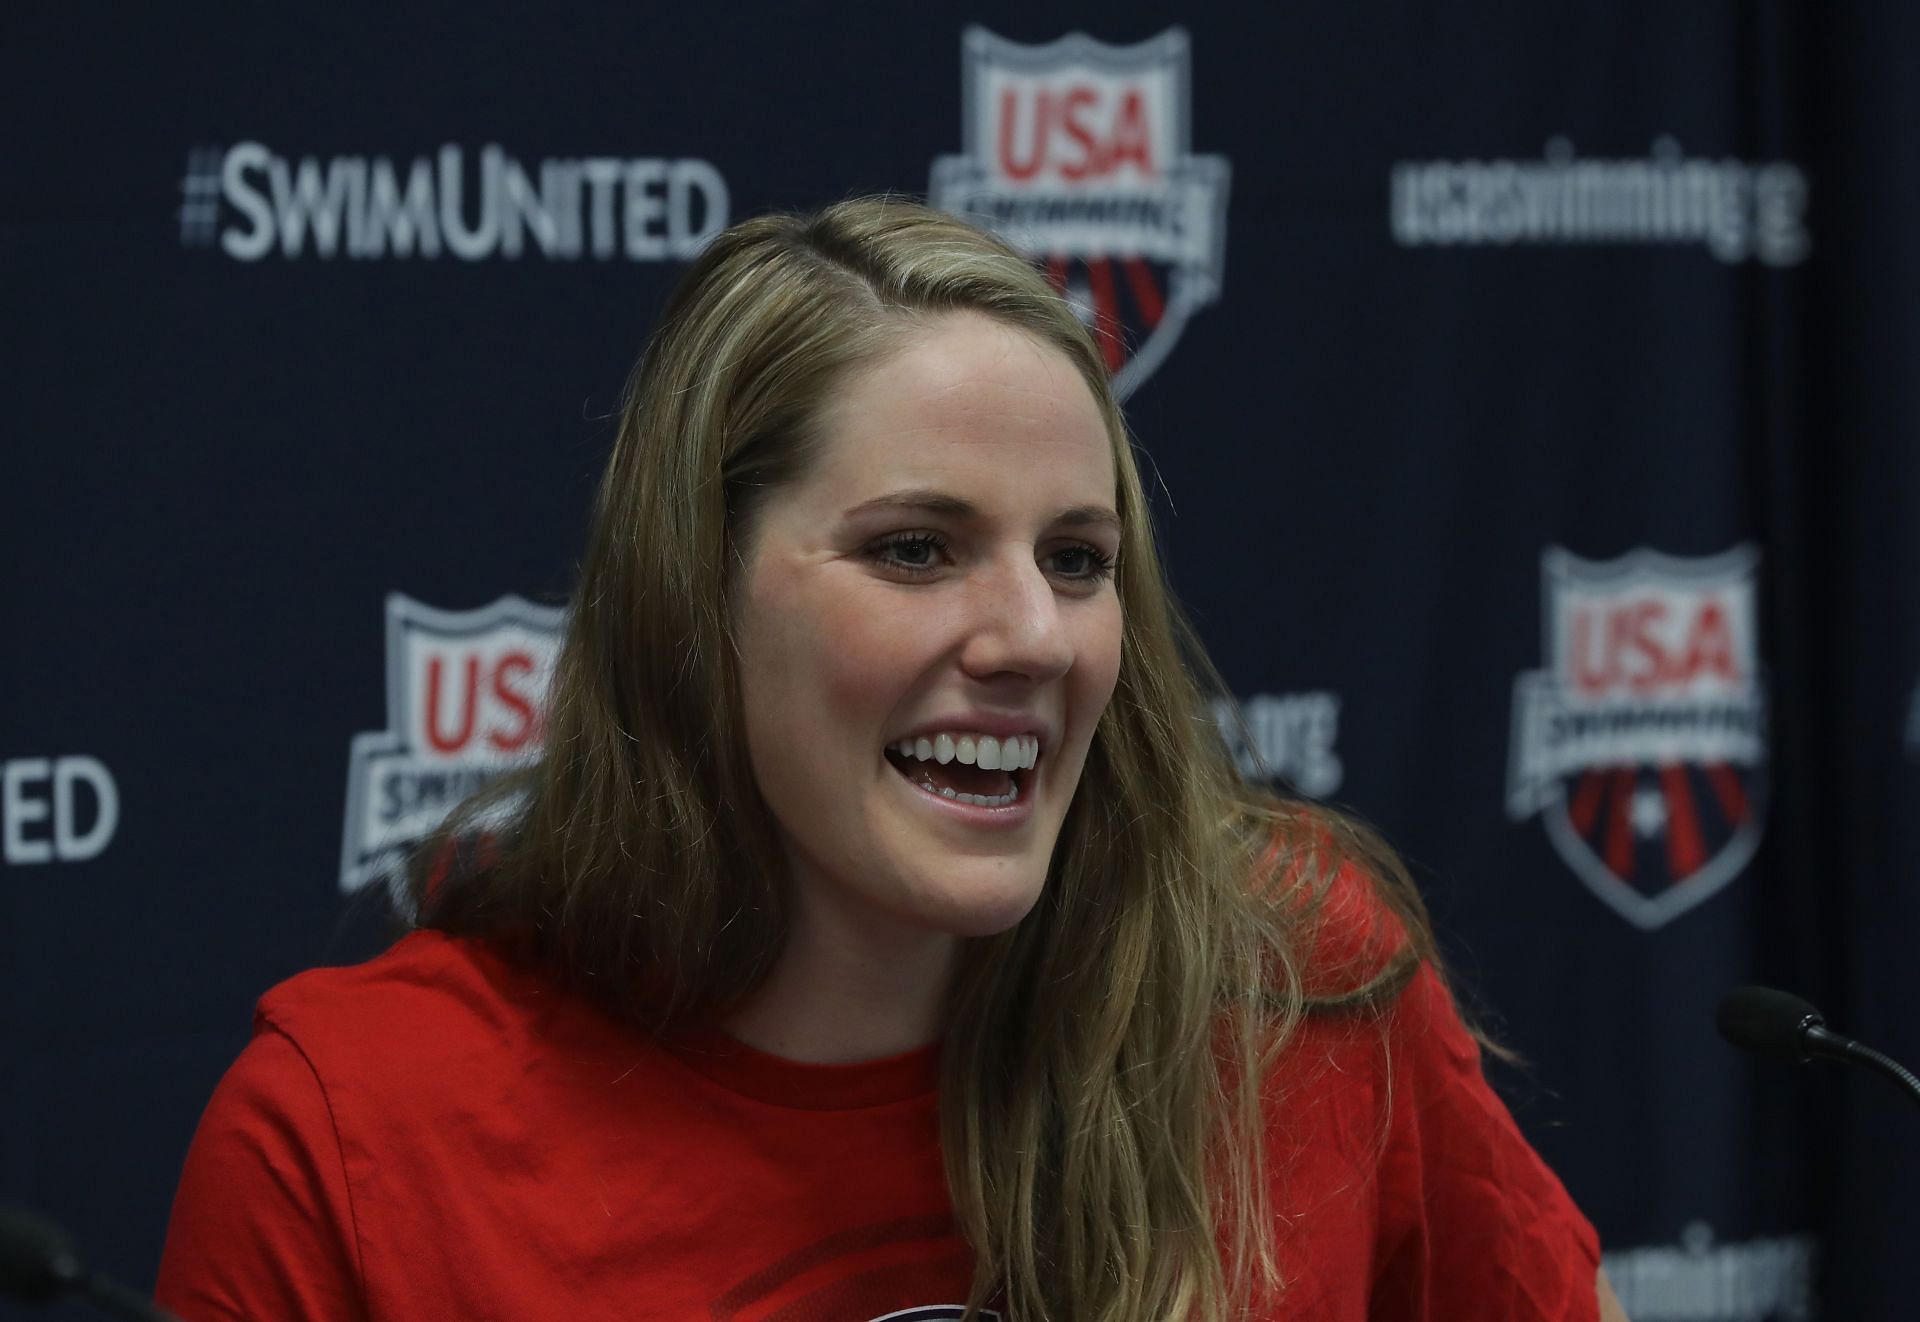 Missy Franklin talks with the media during the 2016 US Olympic Swimming Team Training Camp Media Day on July 16, 2016